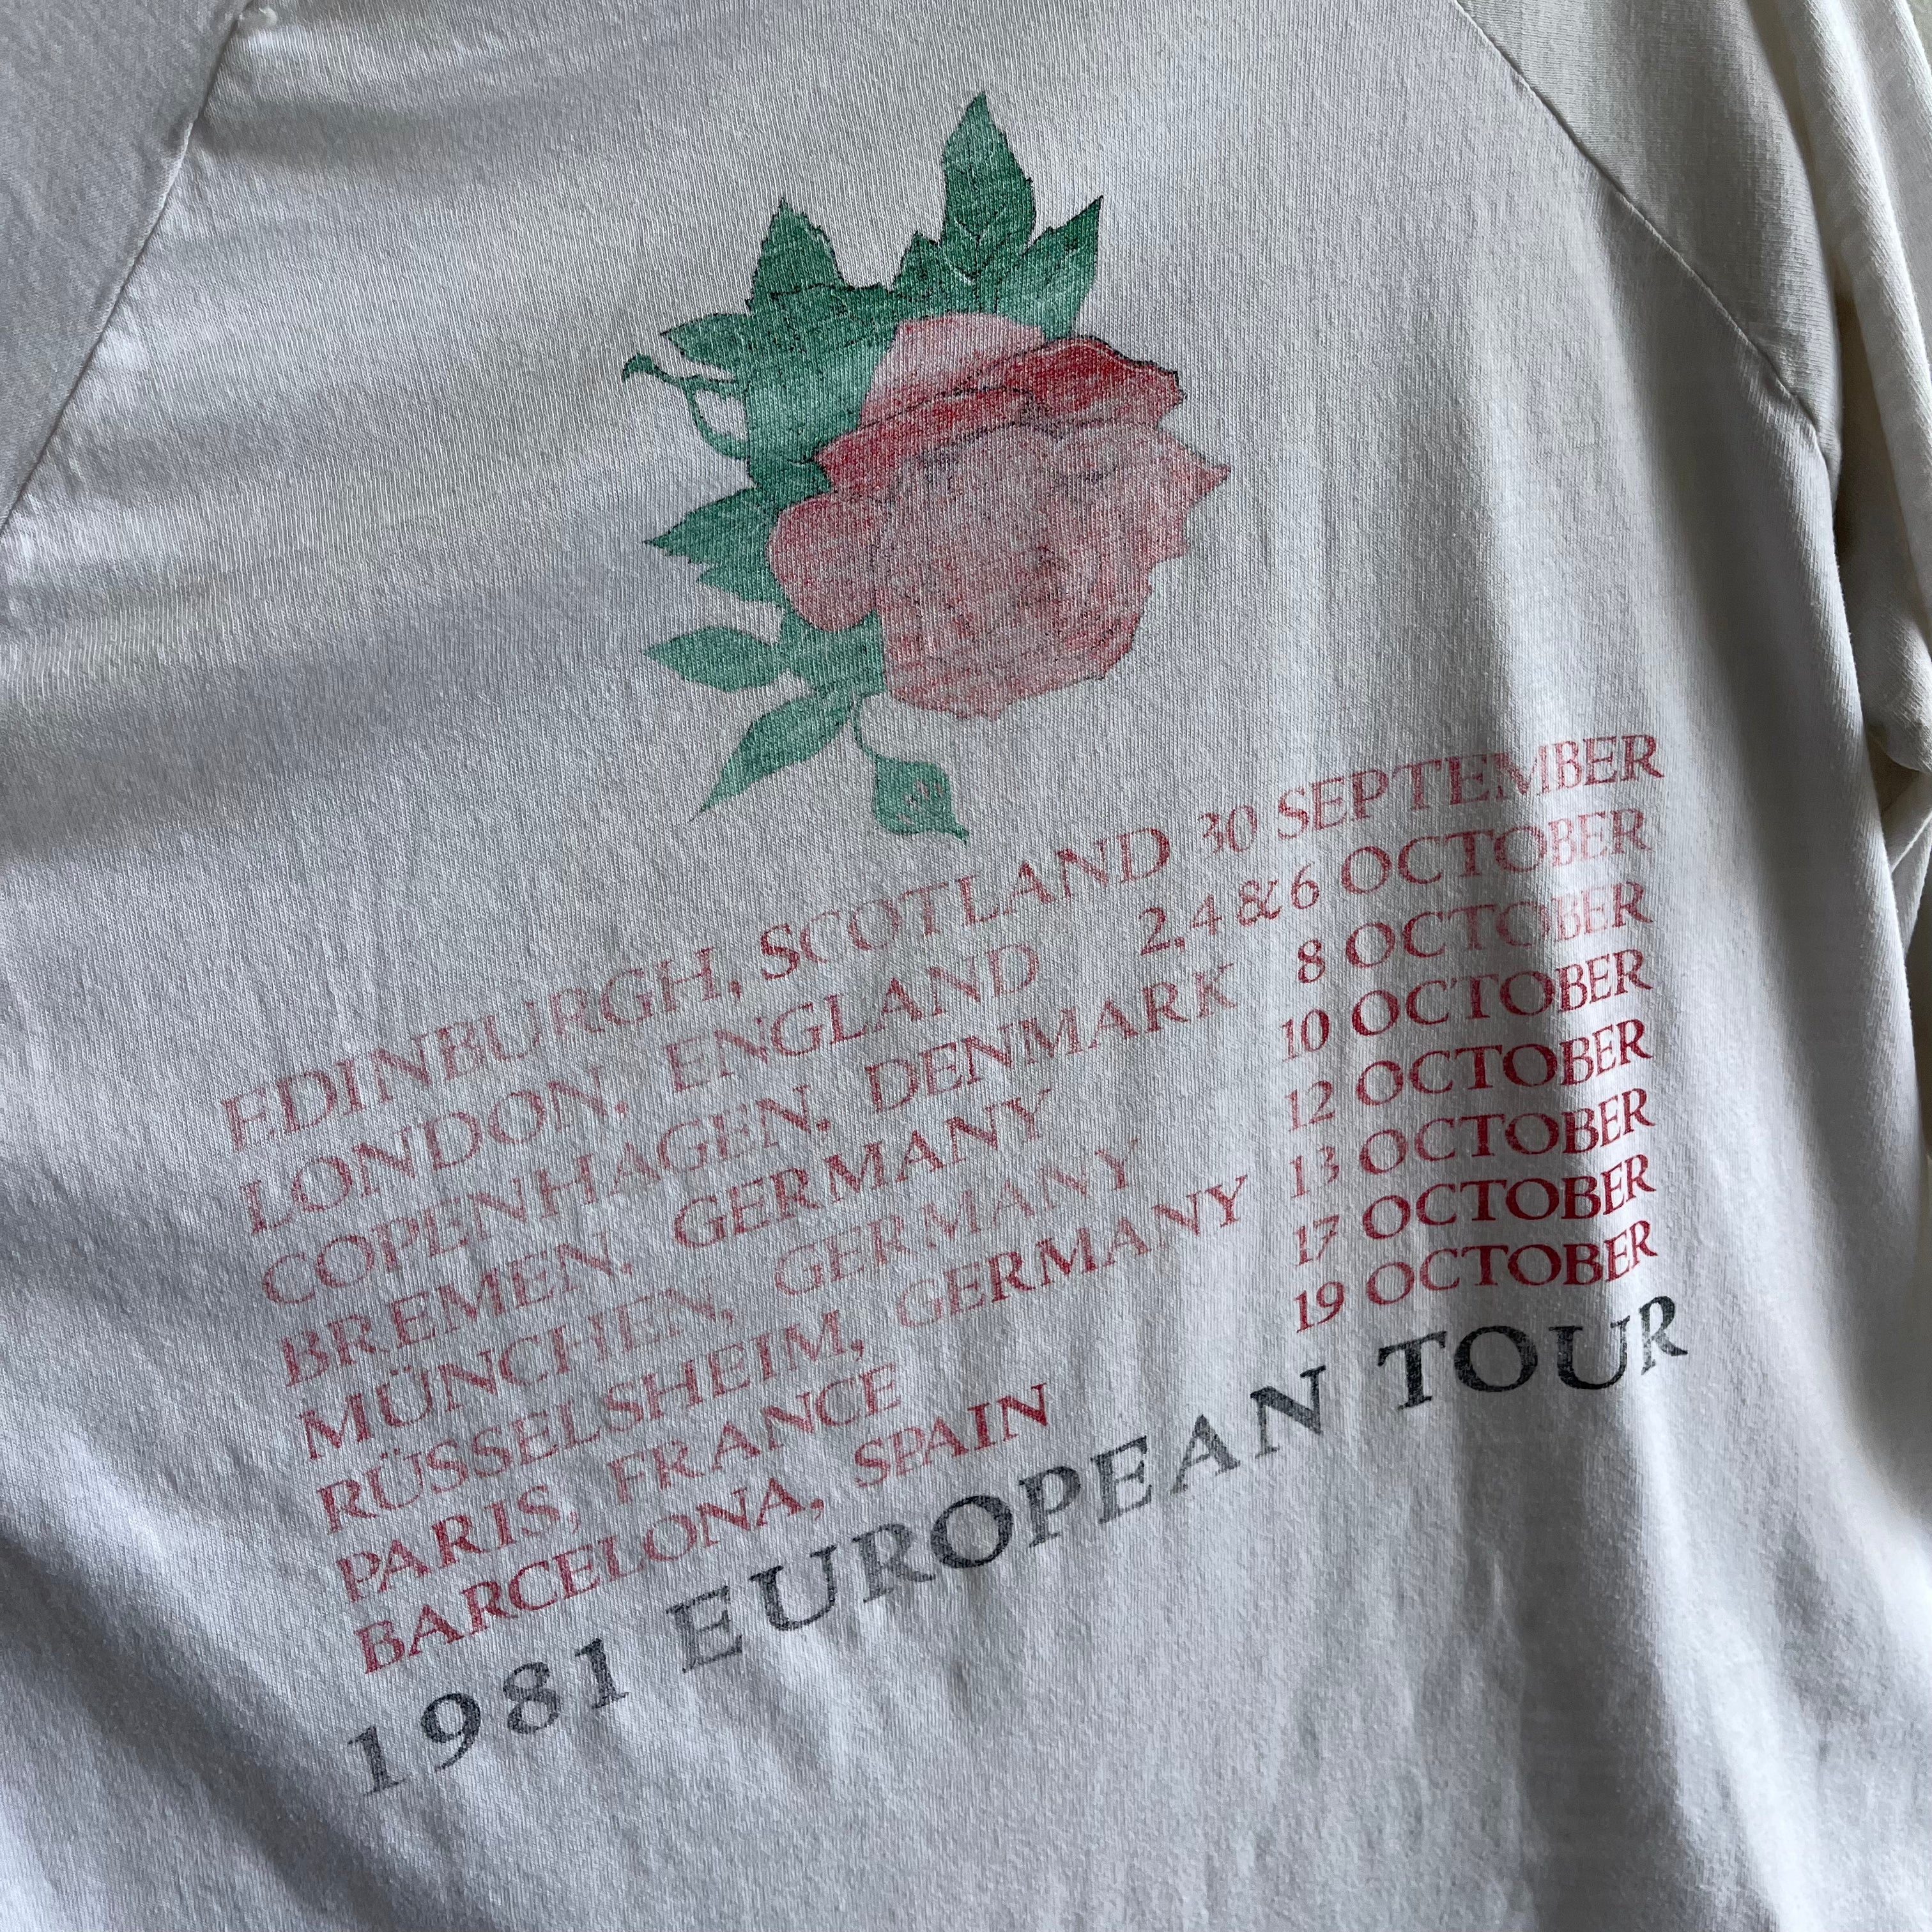 1981 !RARE! Grateful Dead European Tour Baseball Tee - Thin and Stained